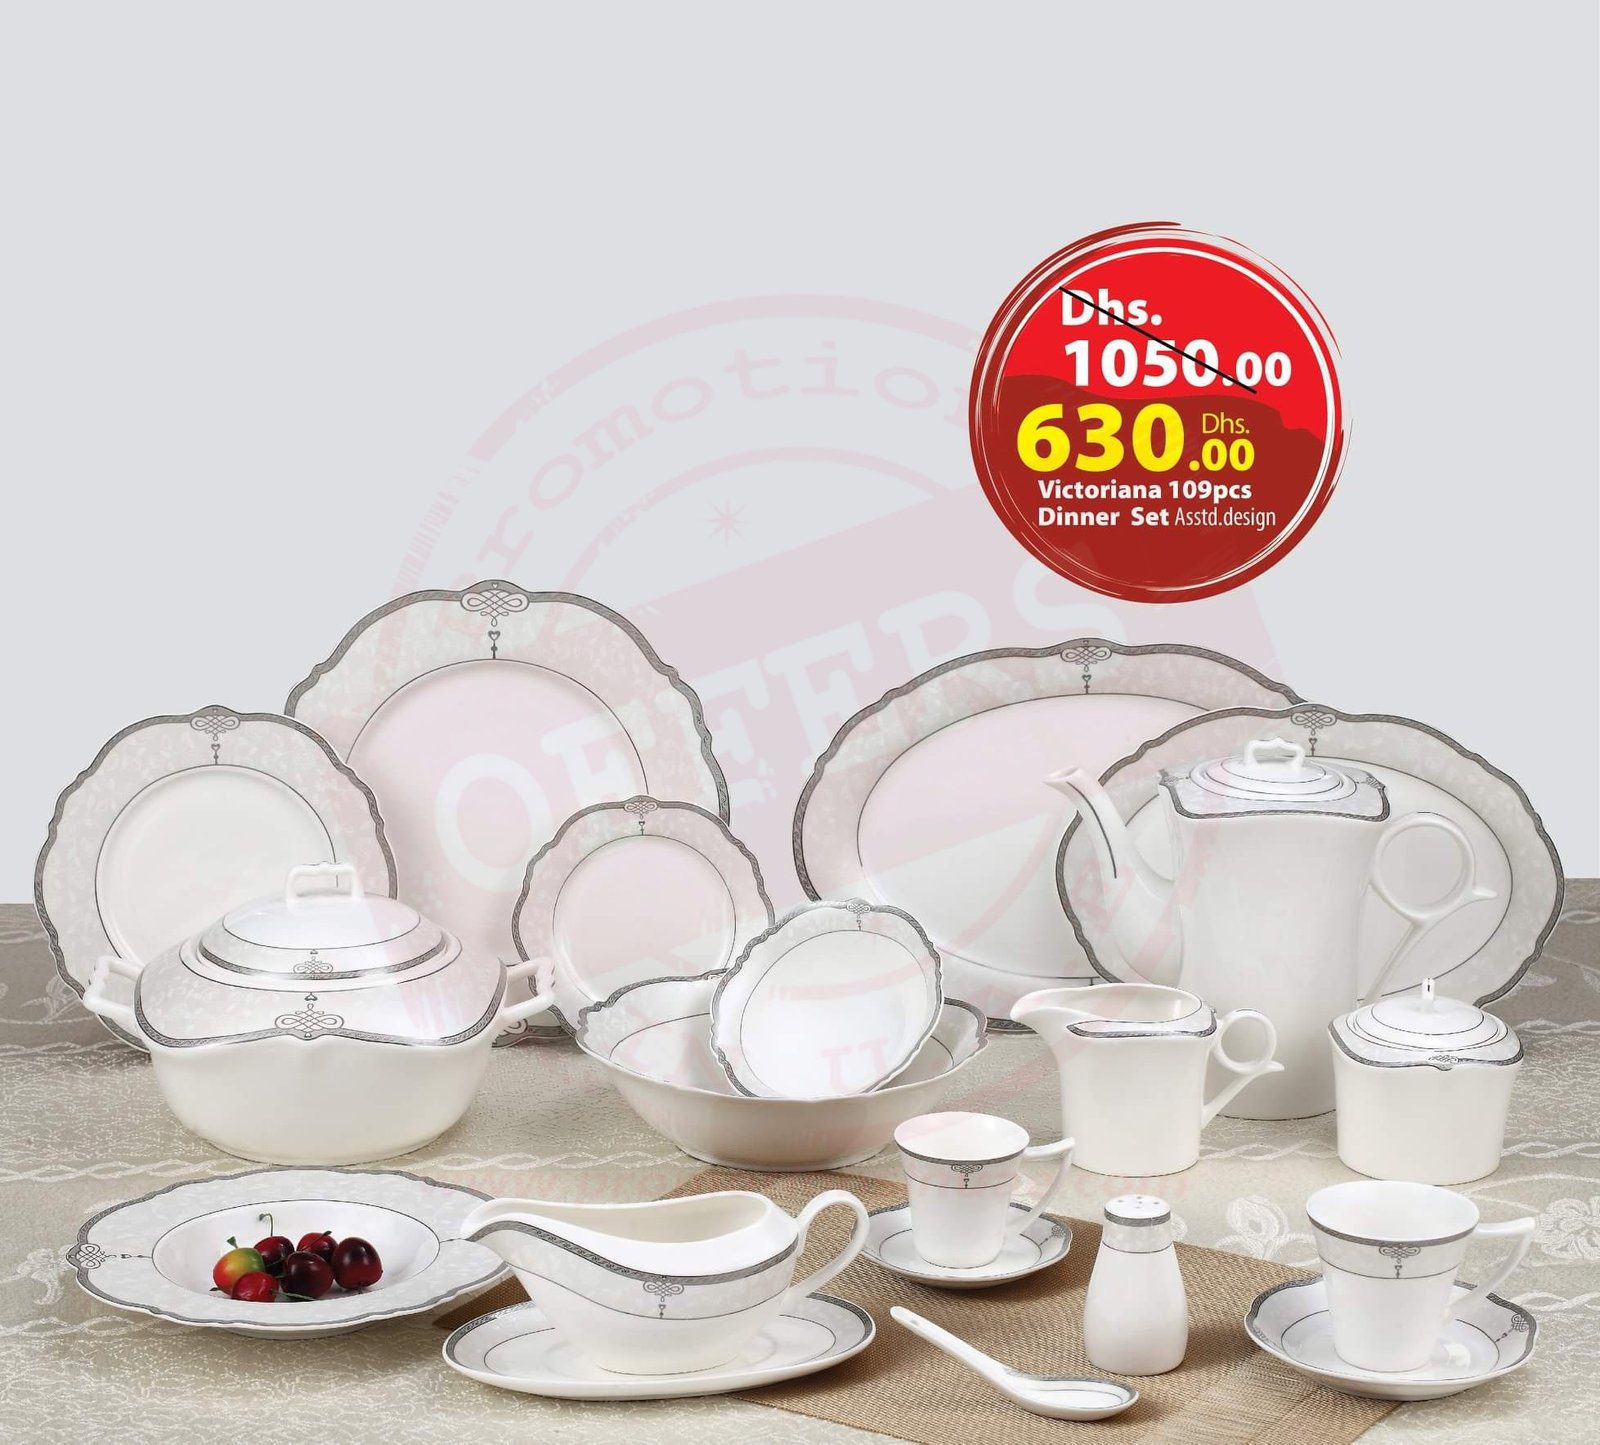 FB IMG 1553580130928 Offer at Home Style UAE